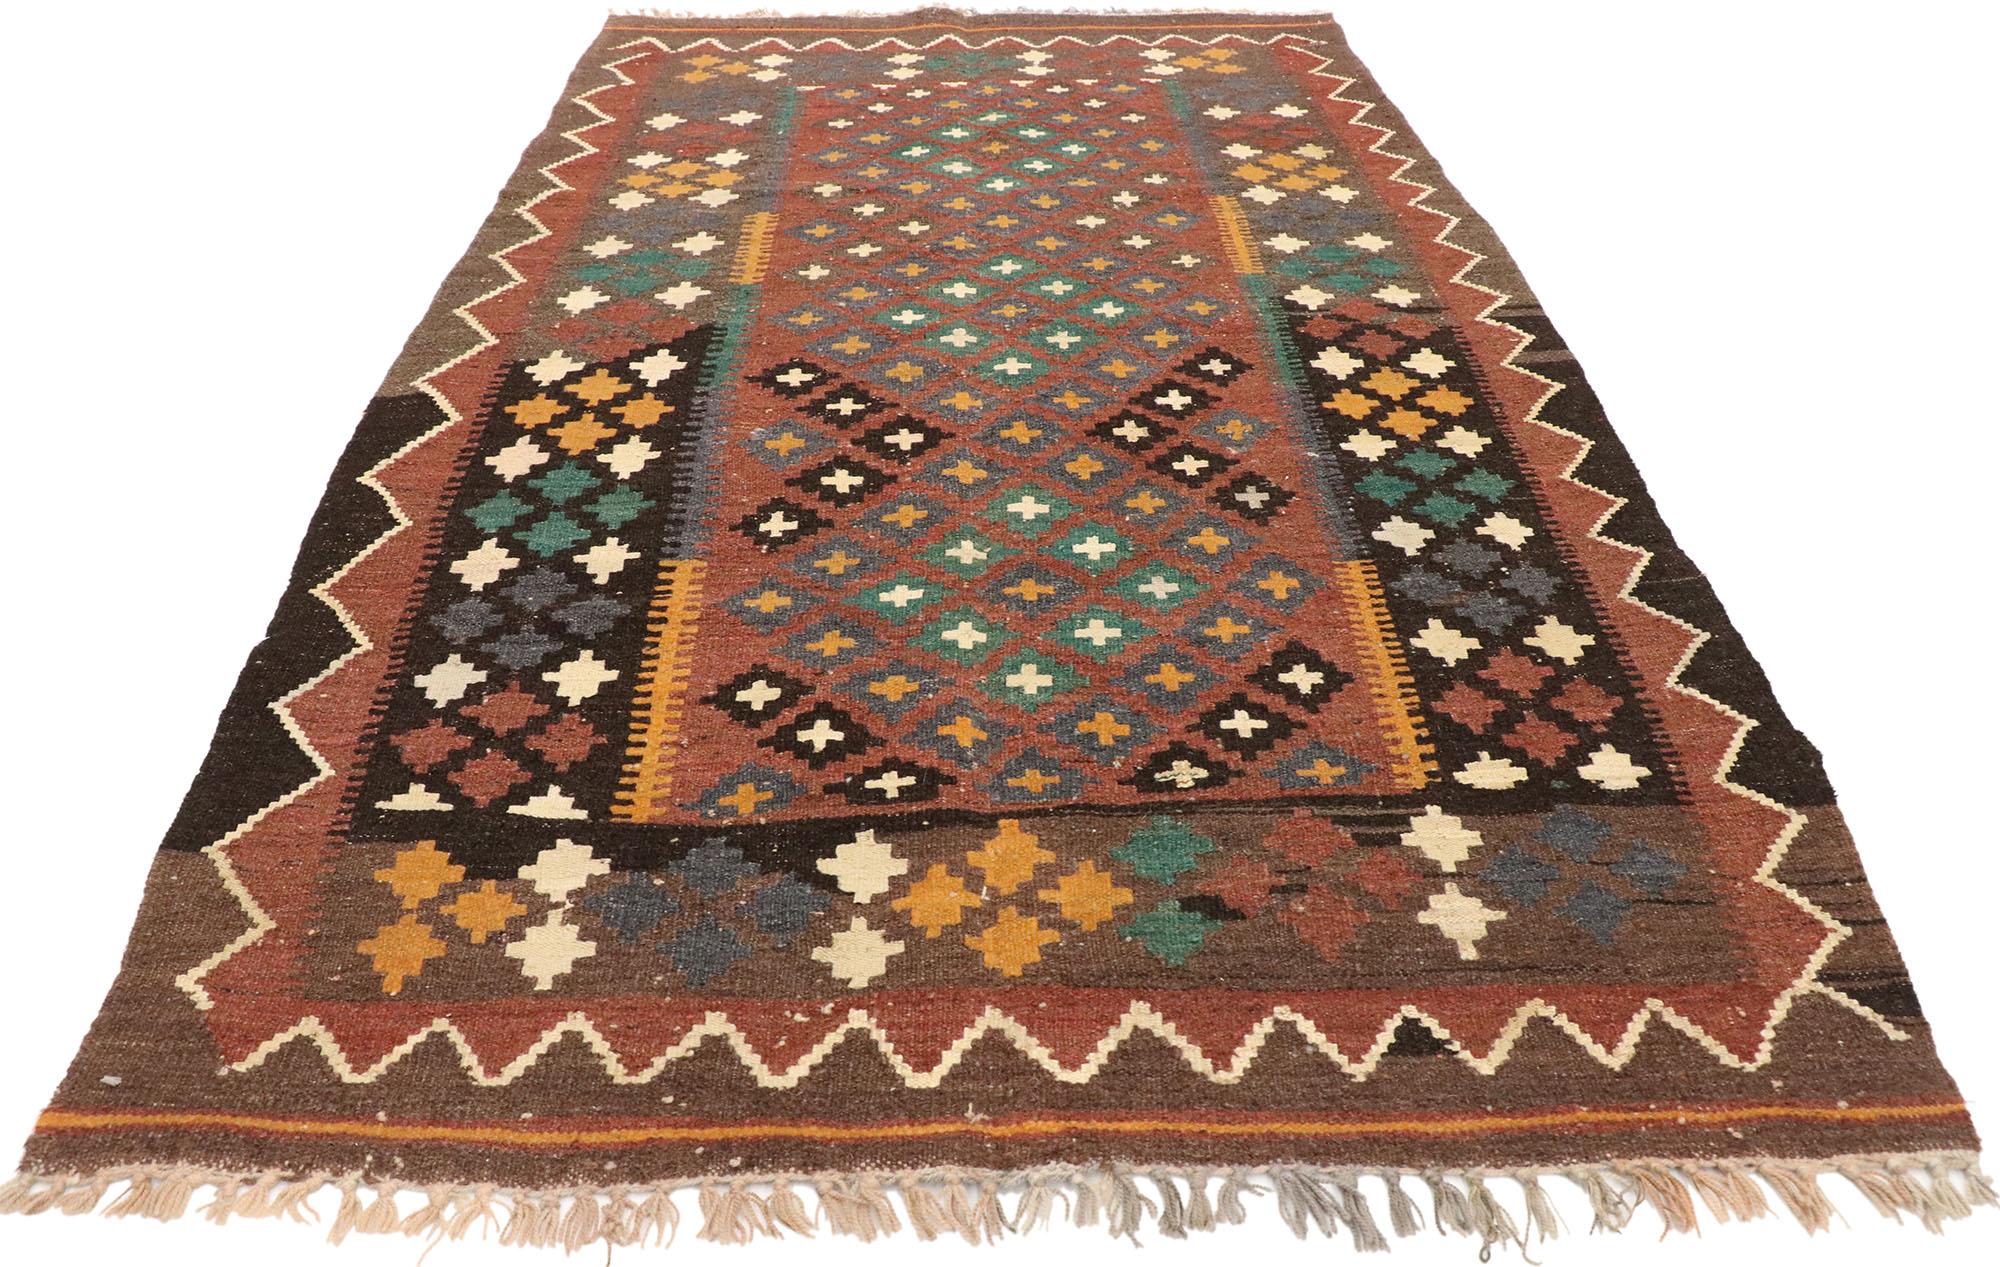 Hand-Woven Vintage Afghan Kilim Rug with Rustic Modern Pacific Northwest Style